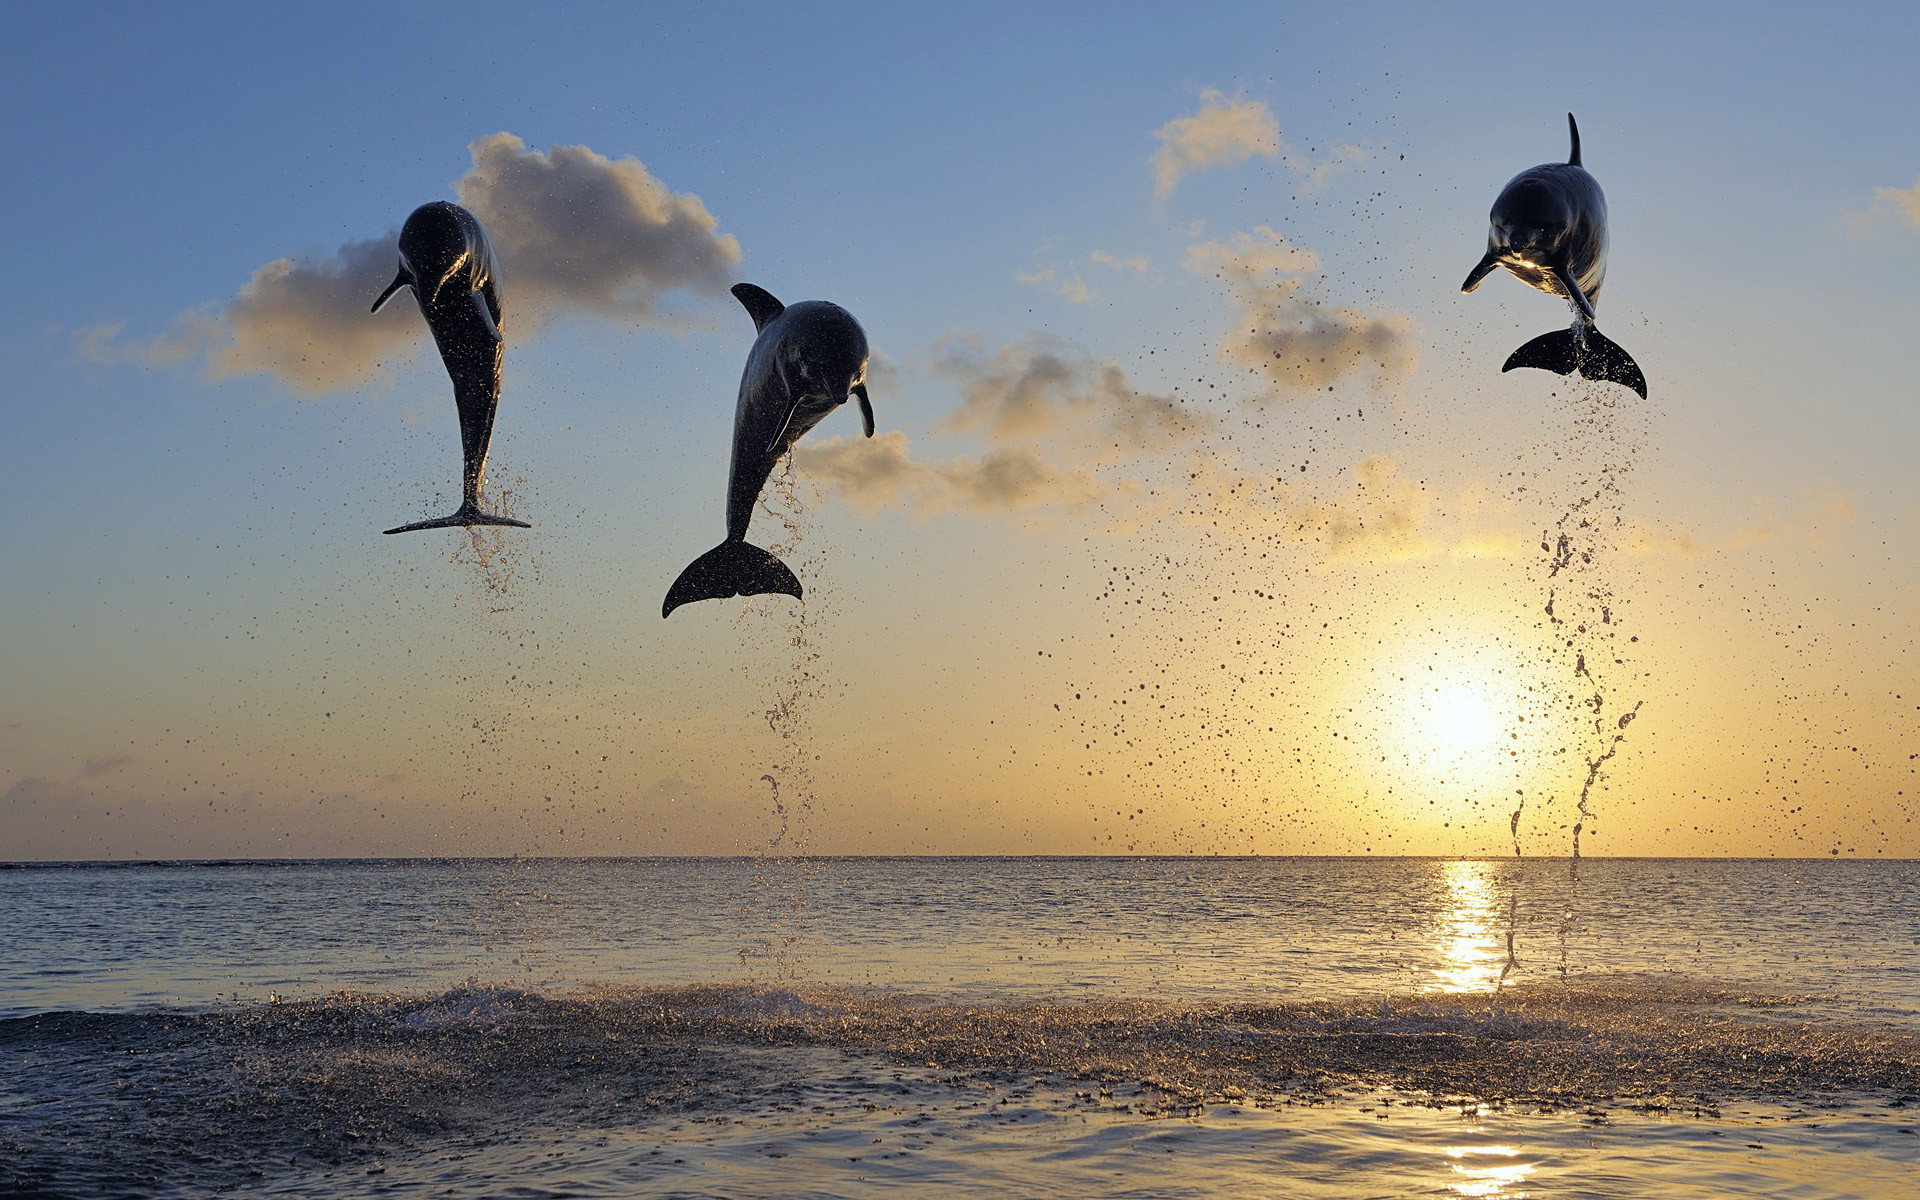 Wallpaper  1920x1200 px dolphin drops ocean sunset 1920x1200   CoolWallpapers  1656069  HD Wallpapers  WallHere